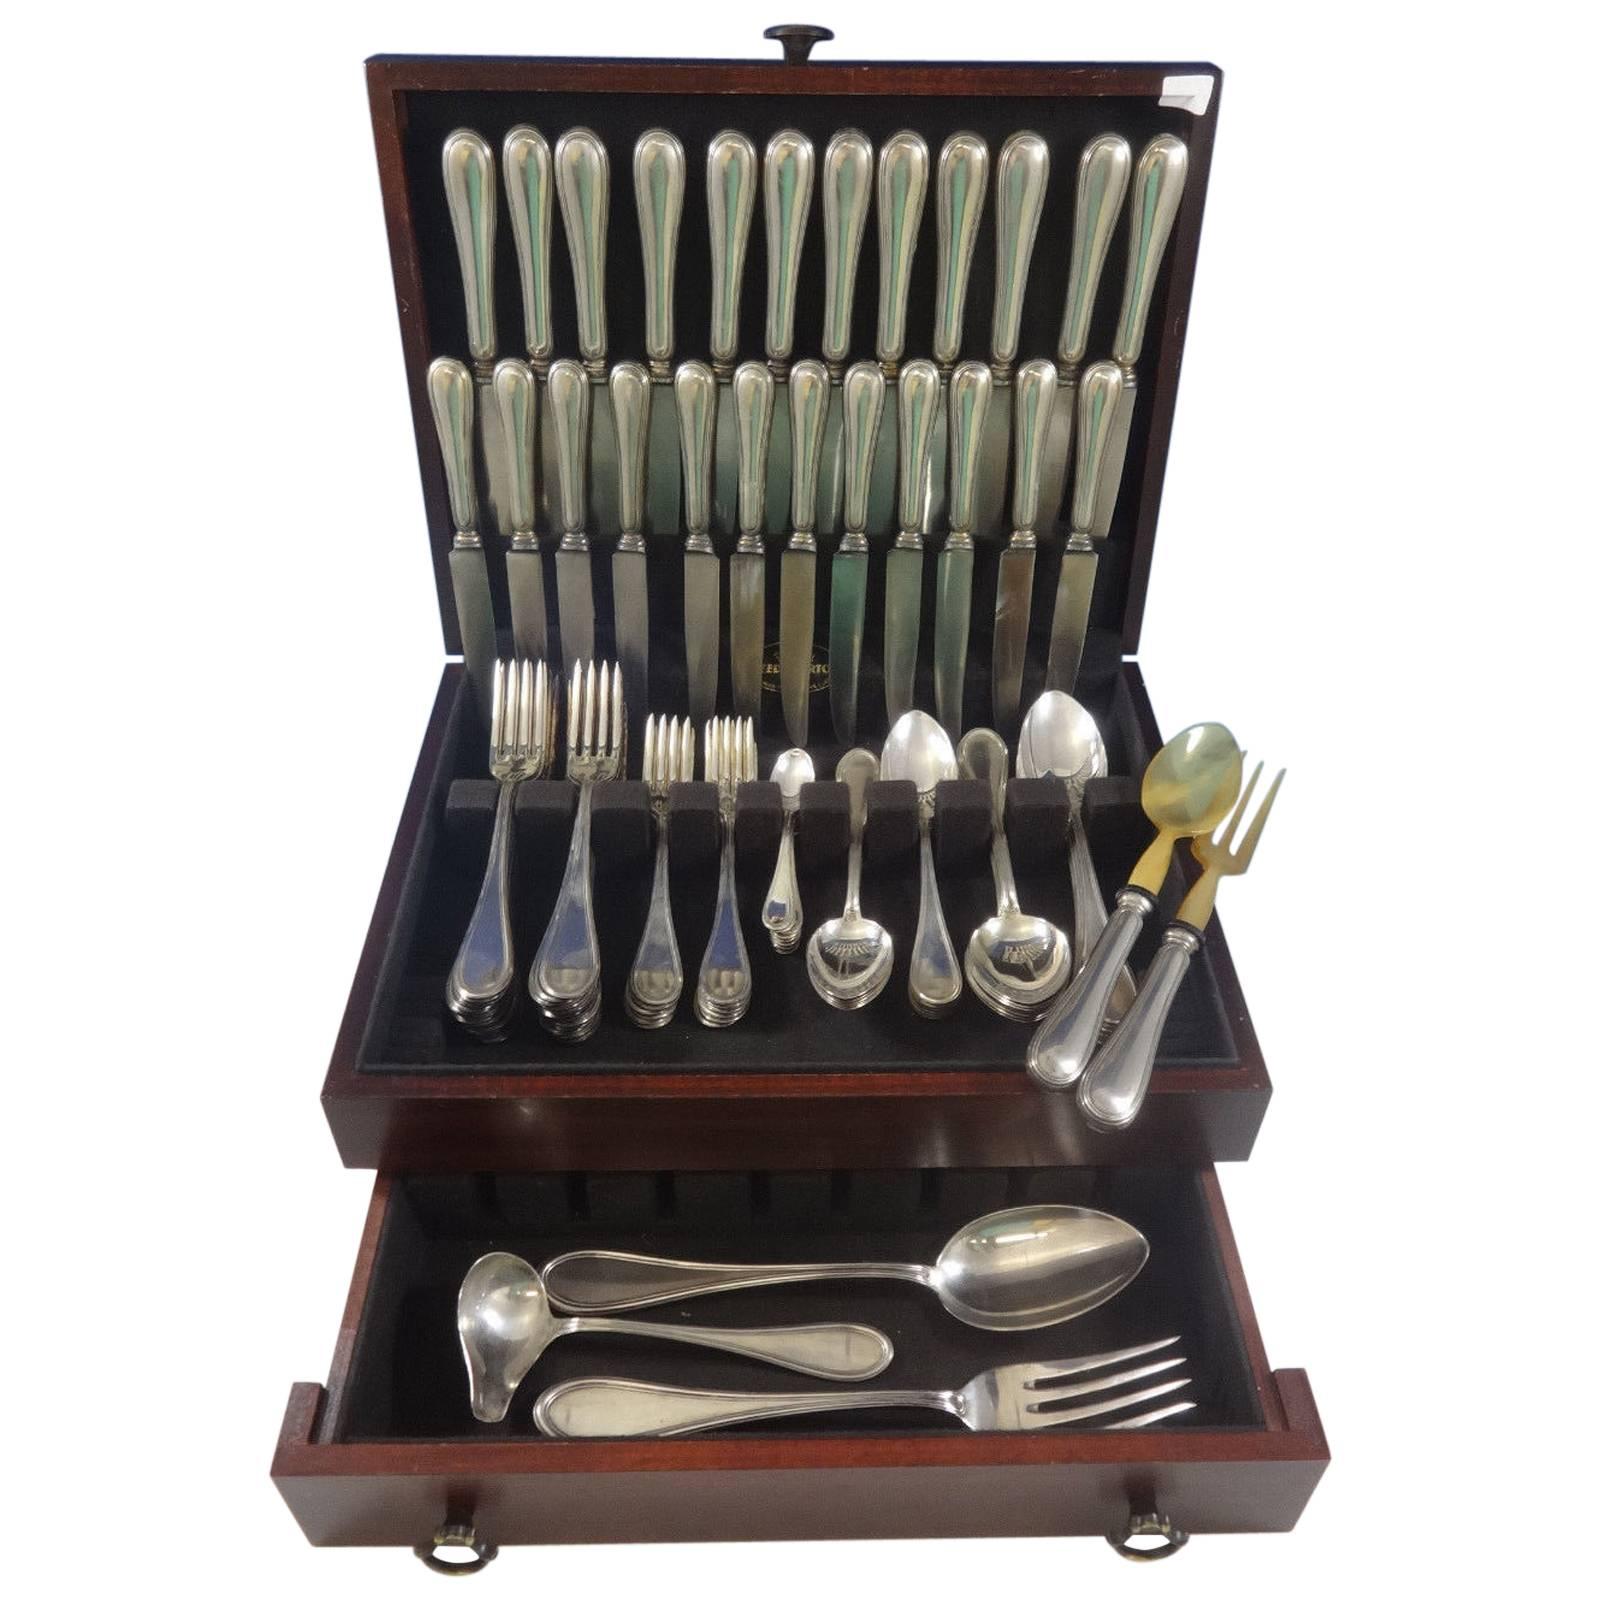 This superb 101 piece dinner size 800 silver old Italian (Italy) set is highest Italian quality, large and heavy and includes:

12 dinner size knives, 10